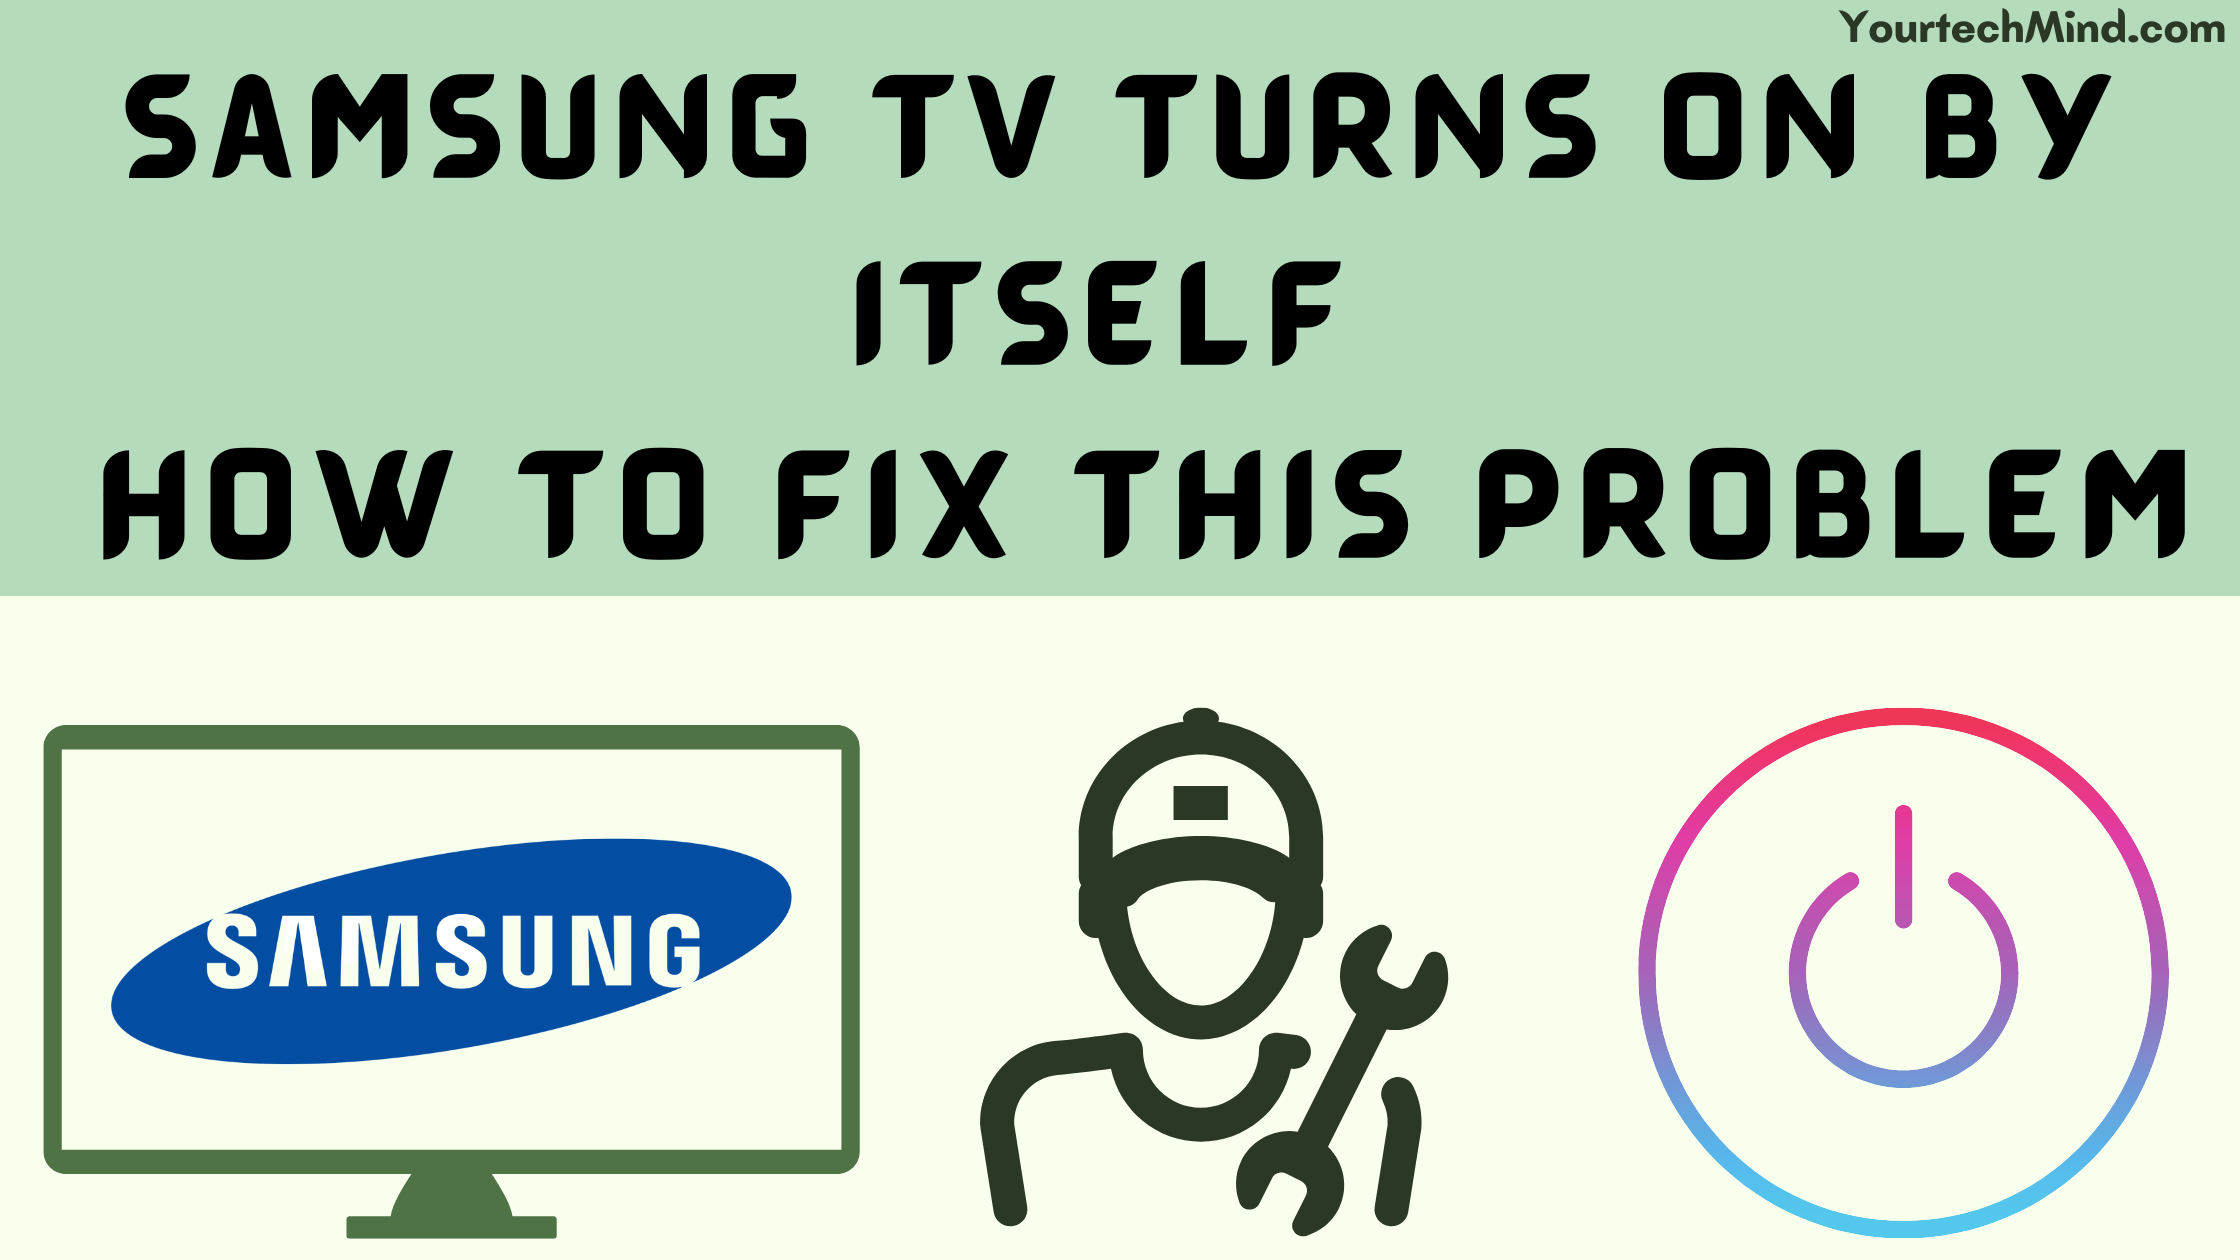 Samsung TV Turns On By Itself